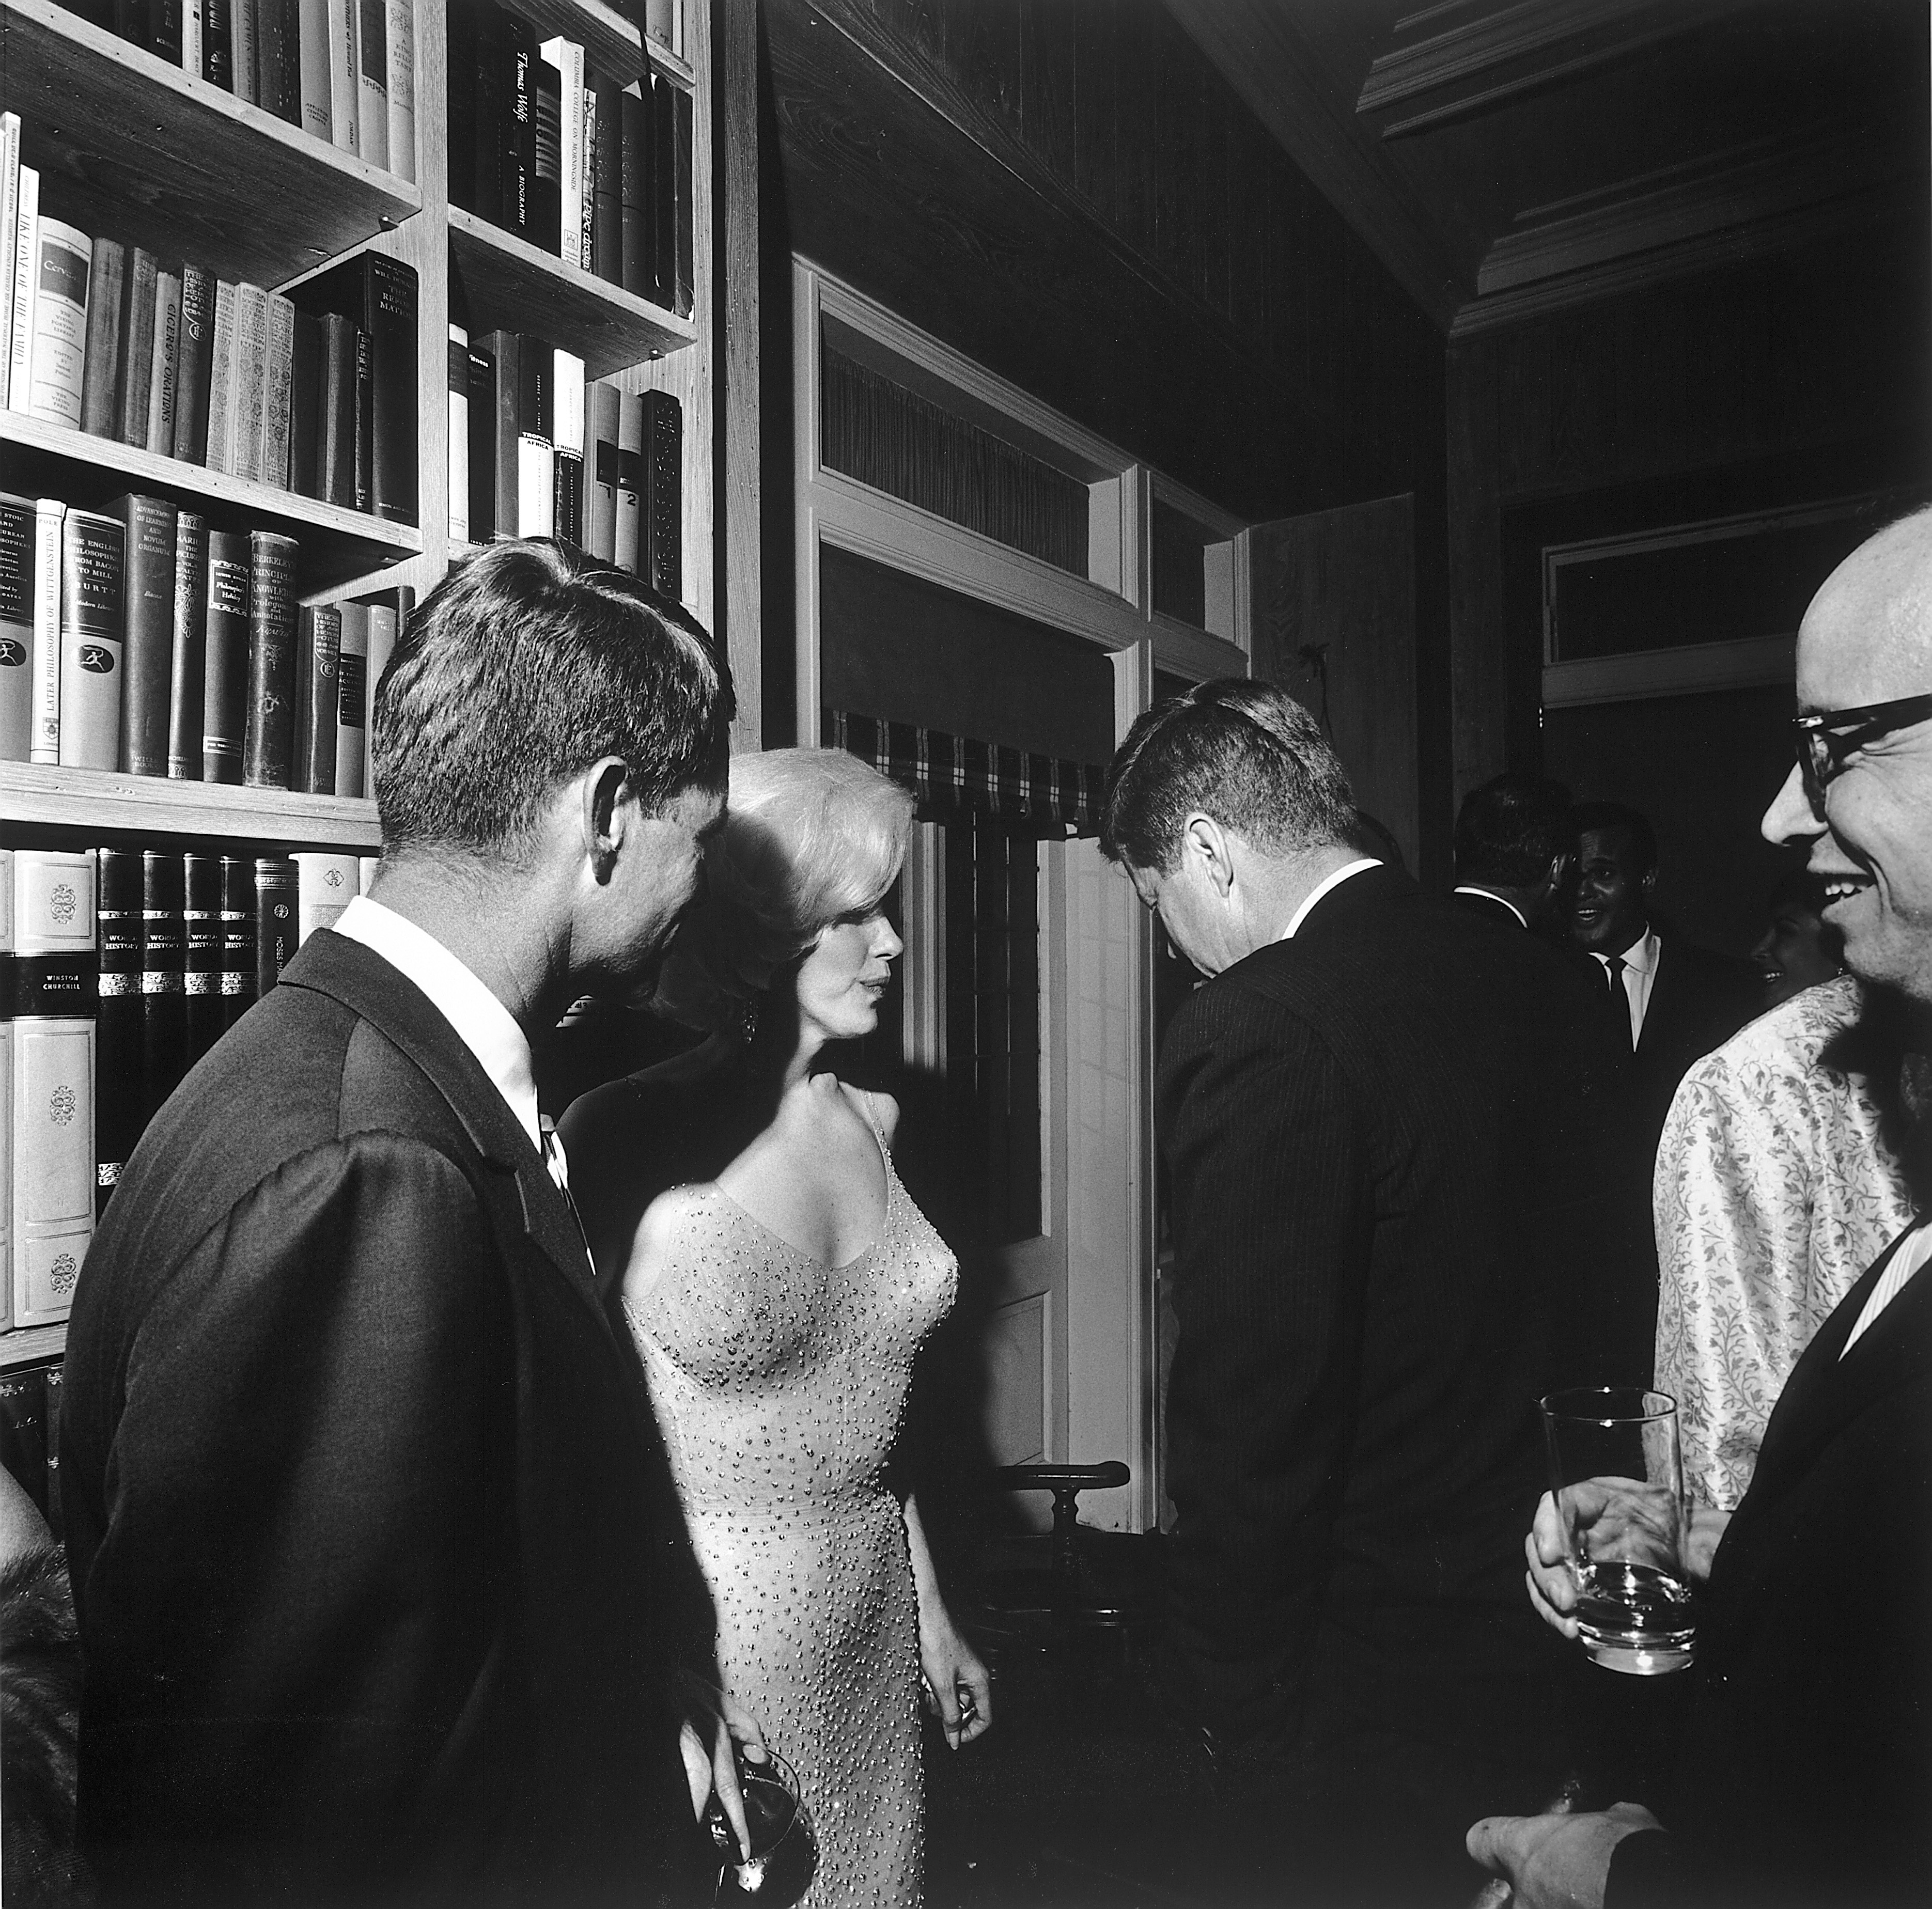 Marilyn Monroe shown wearing what would be dubbed the Happy Birthday, Mr. President dress in a photo taken by Cecil W. Stoughton on May 19, 1962 at Madison Square Garden in New York City. Robert Kennedy is at the far left, and President John F. Kennedy has his back to the camera. The current owner of the dress, Ripley’s Believe It Or Not!, is facing criticism for allowing Kim Kardashian to briefly wear it at the 2022 Met Gala, which some say caused damage to the famous garment. Image courtesy of Wikimedia Commons, which advises that it is in the public domain.